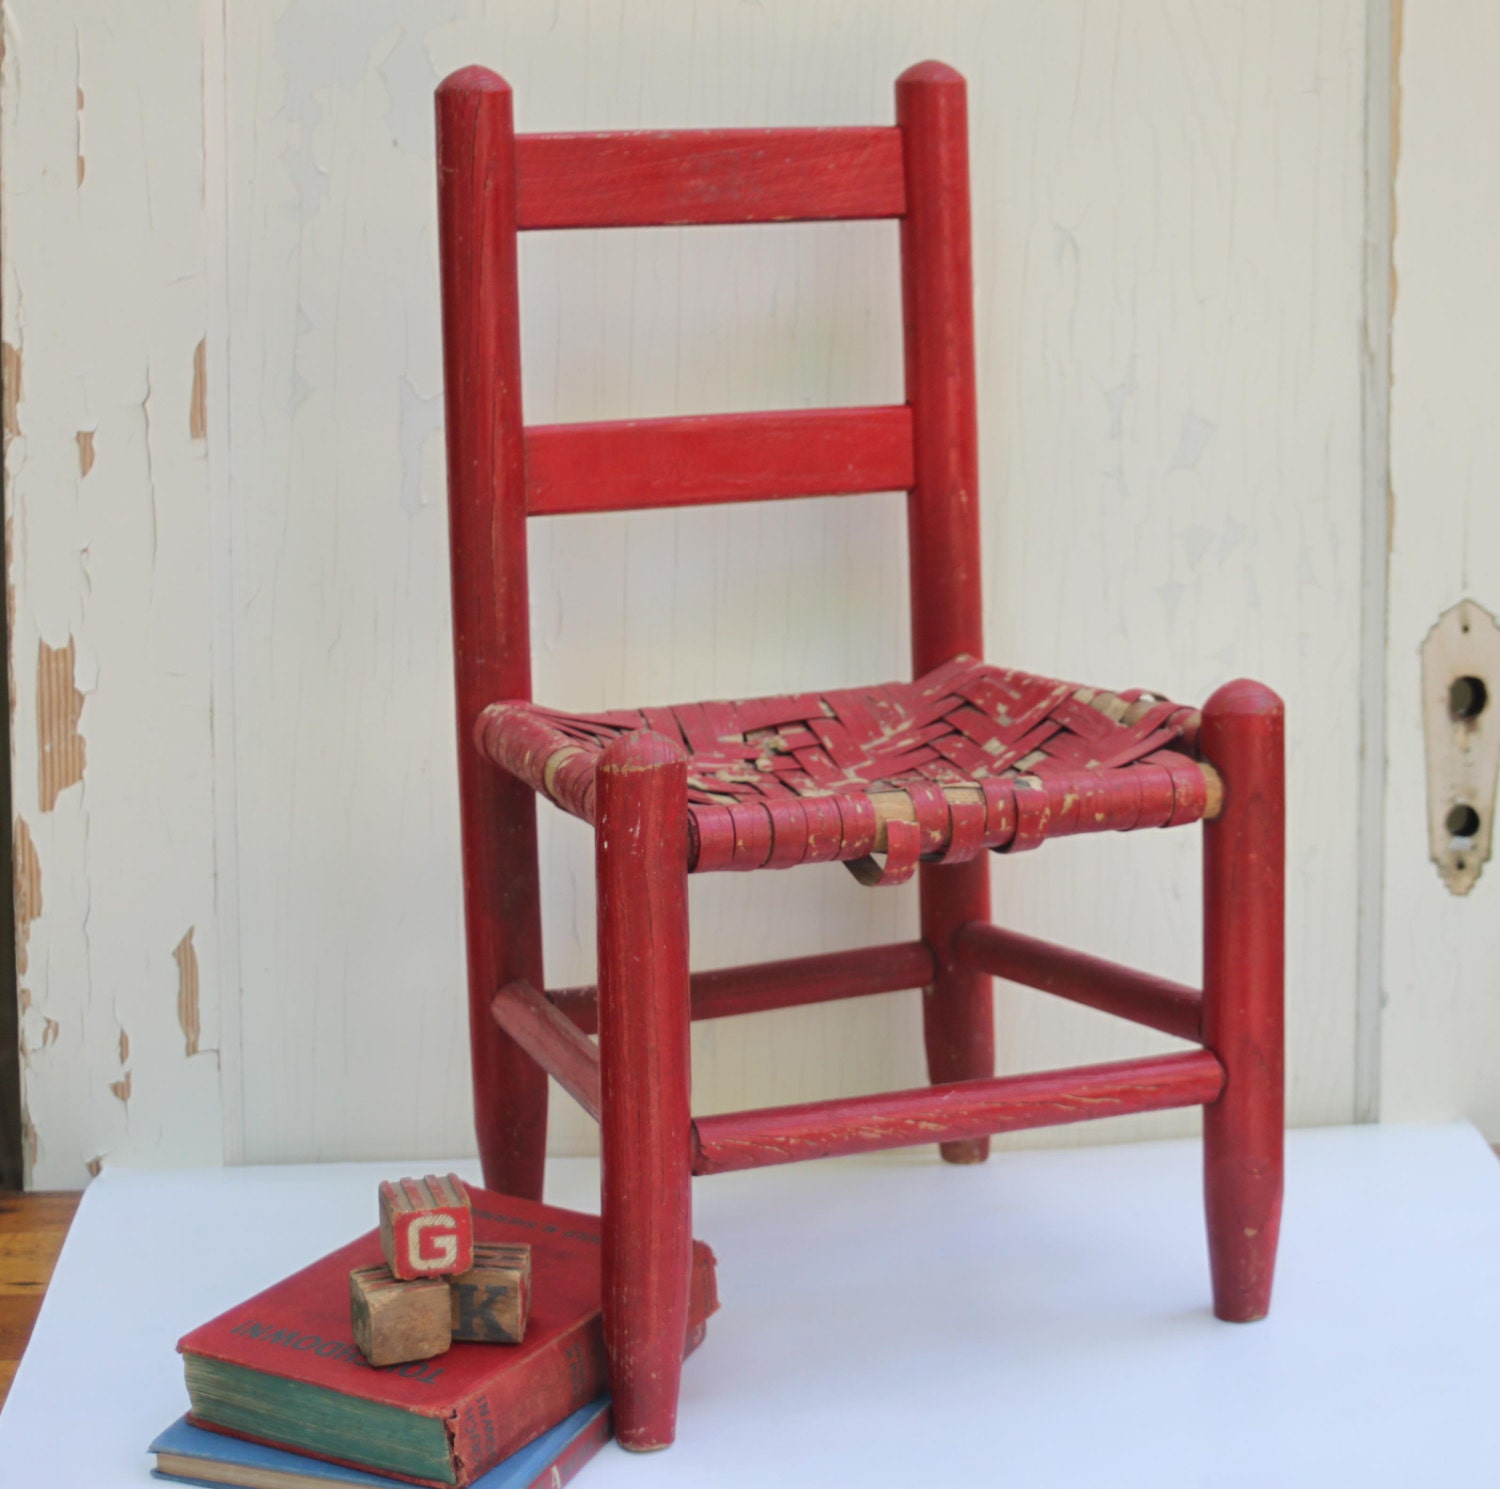 Vintage Red Child’s Chair with Woven Seat – Folk Art – Haute Juice